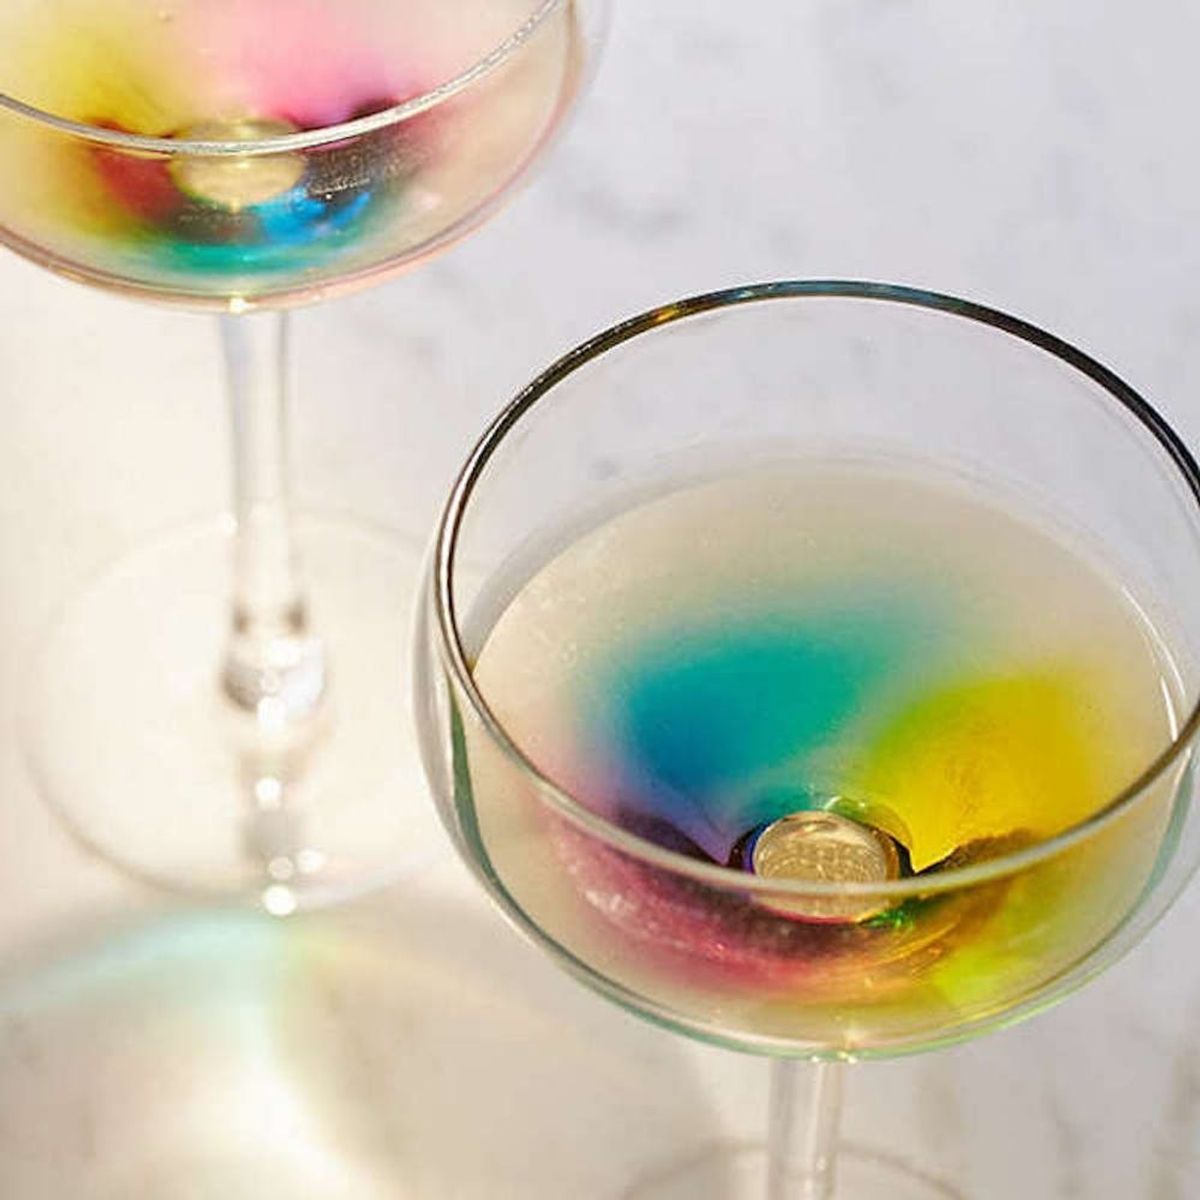 These Wine Glasses Put RAINBOWS into Your Champagne